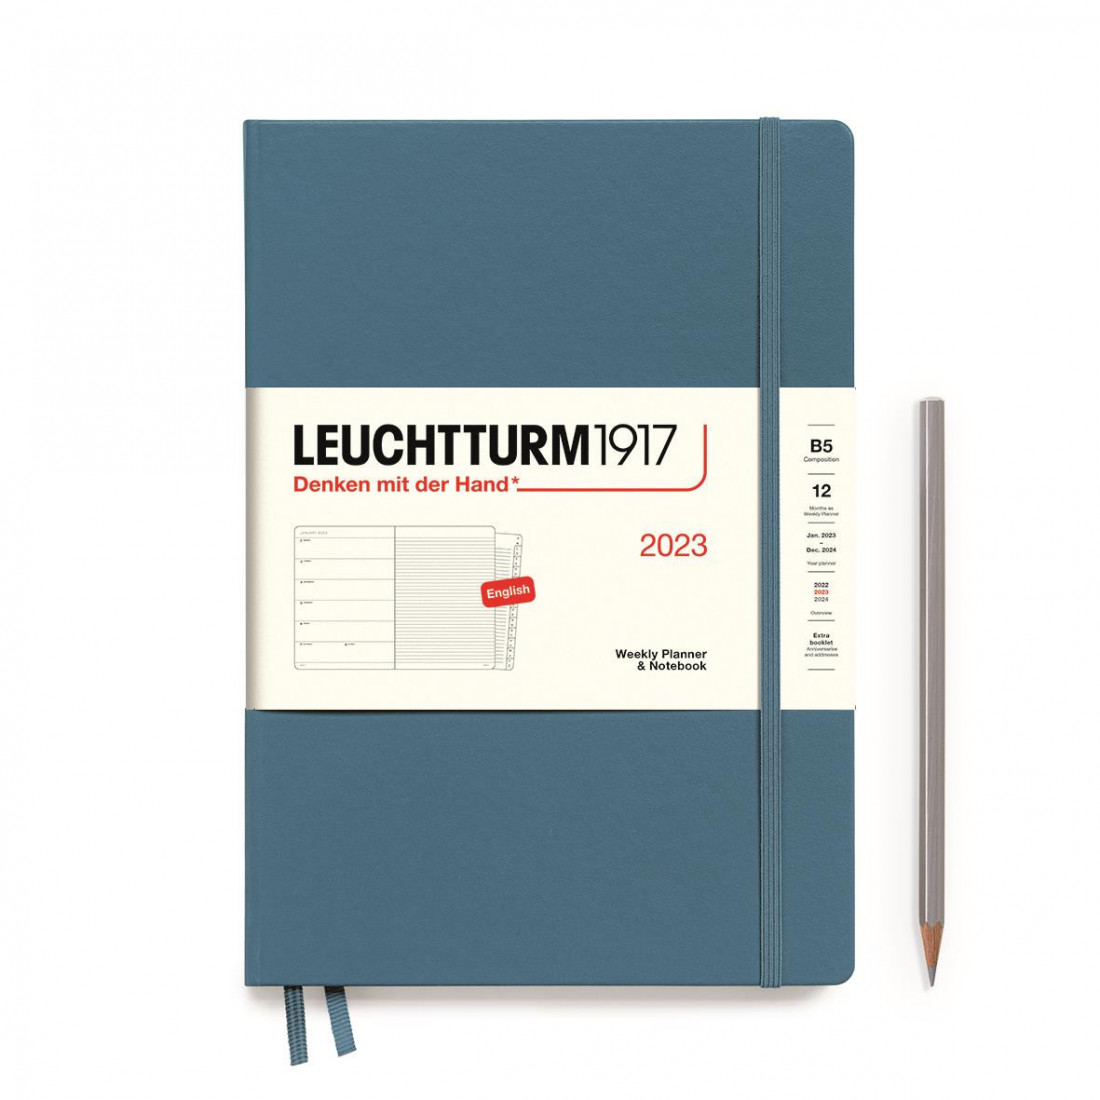 Leuchtturm 1917 Weekly Planner and Notebook 2023,B5, Stone Blue, english